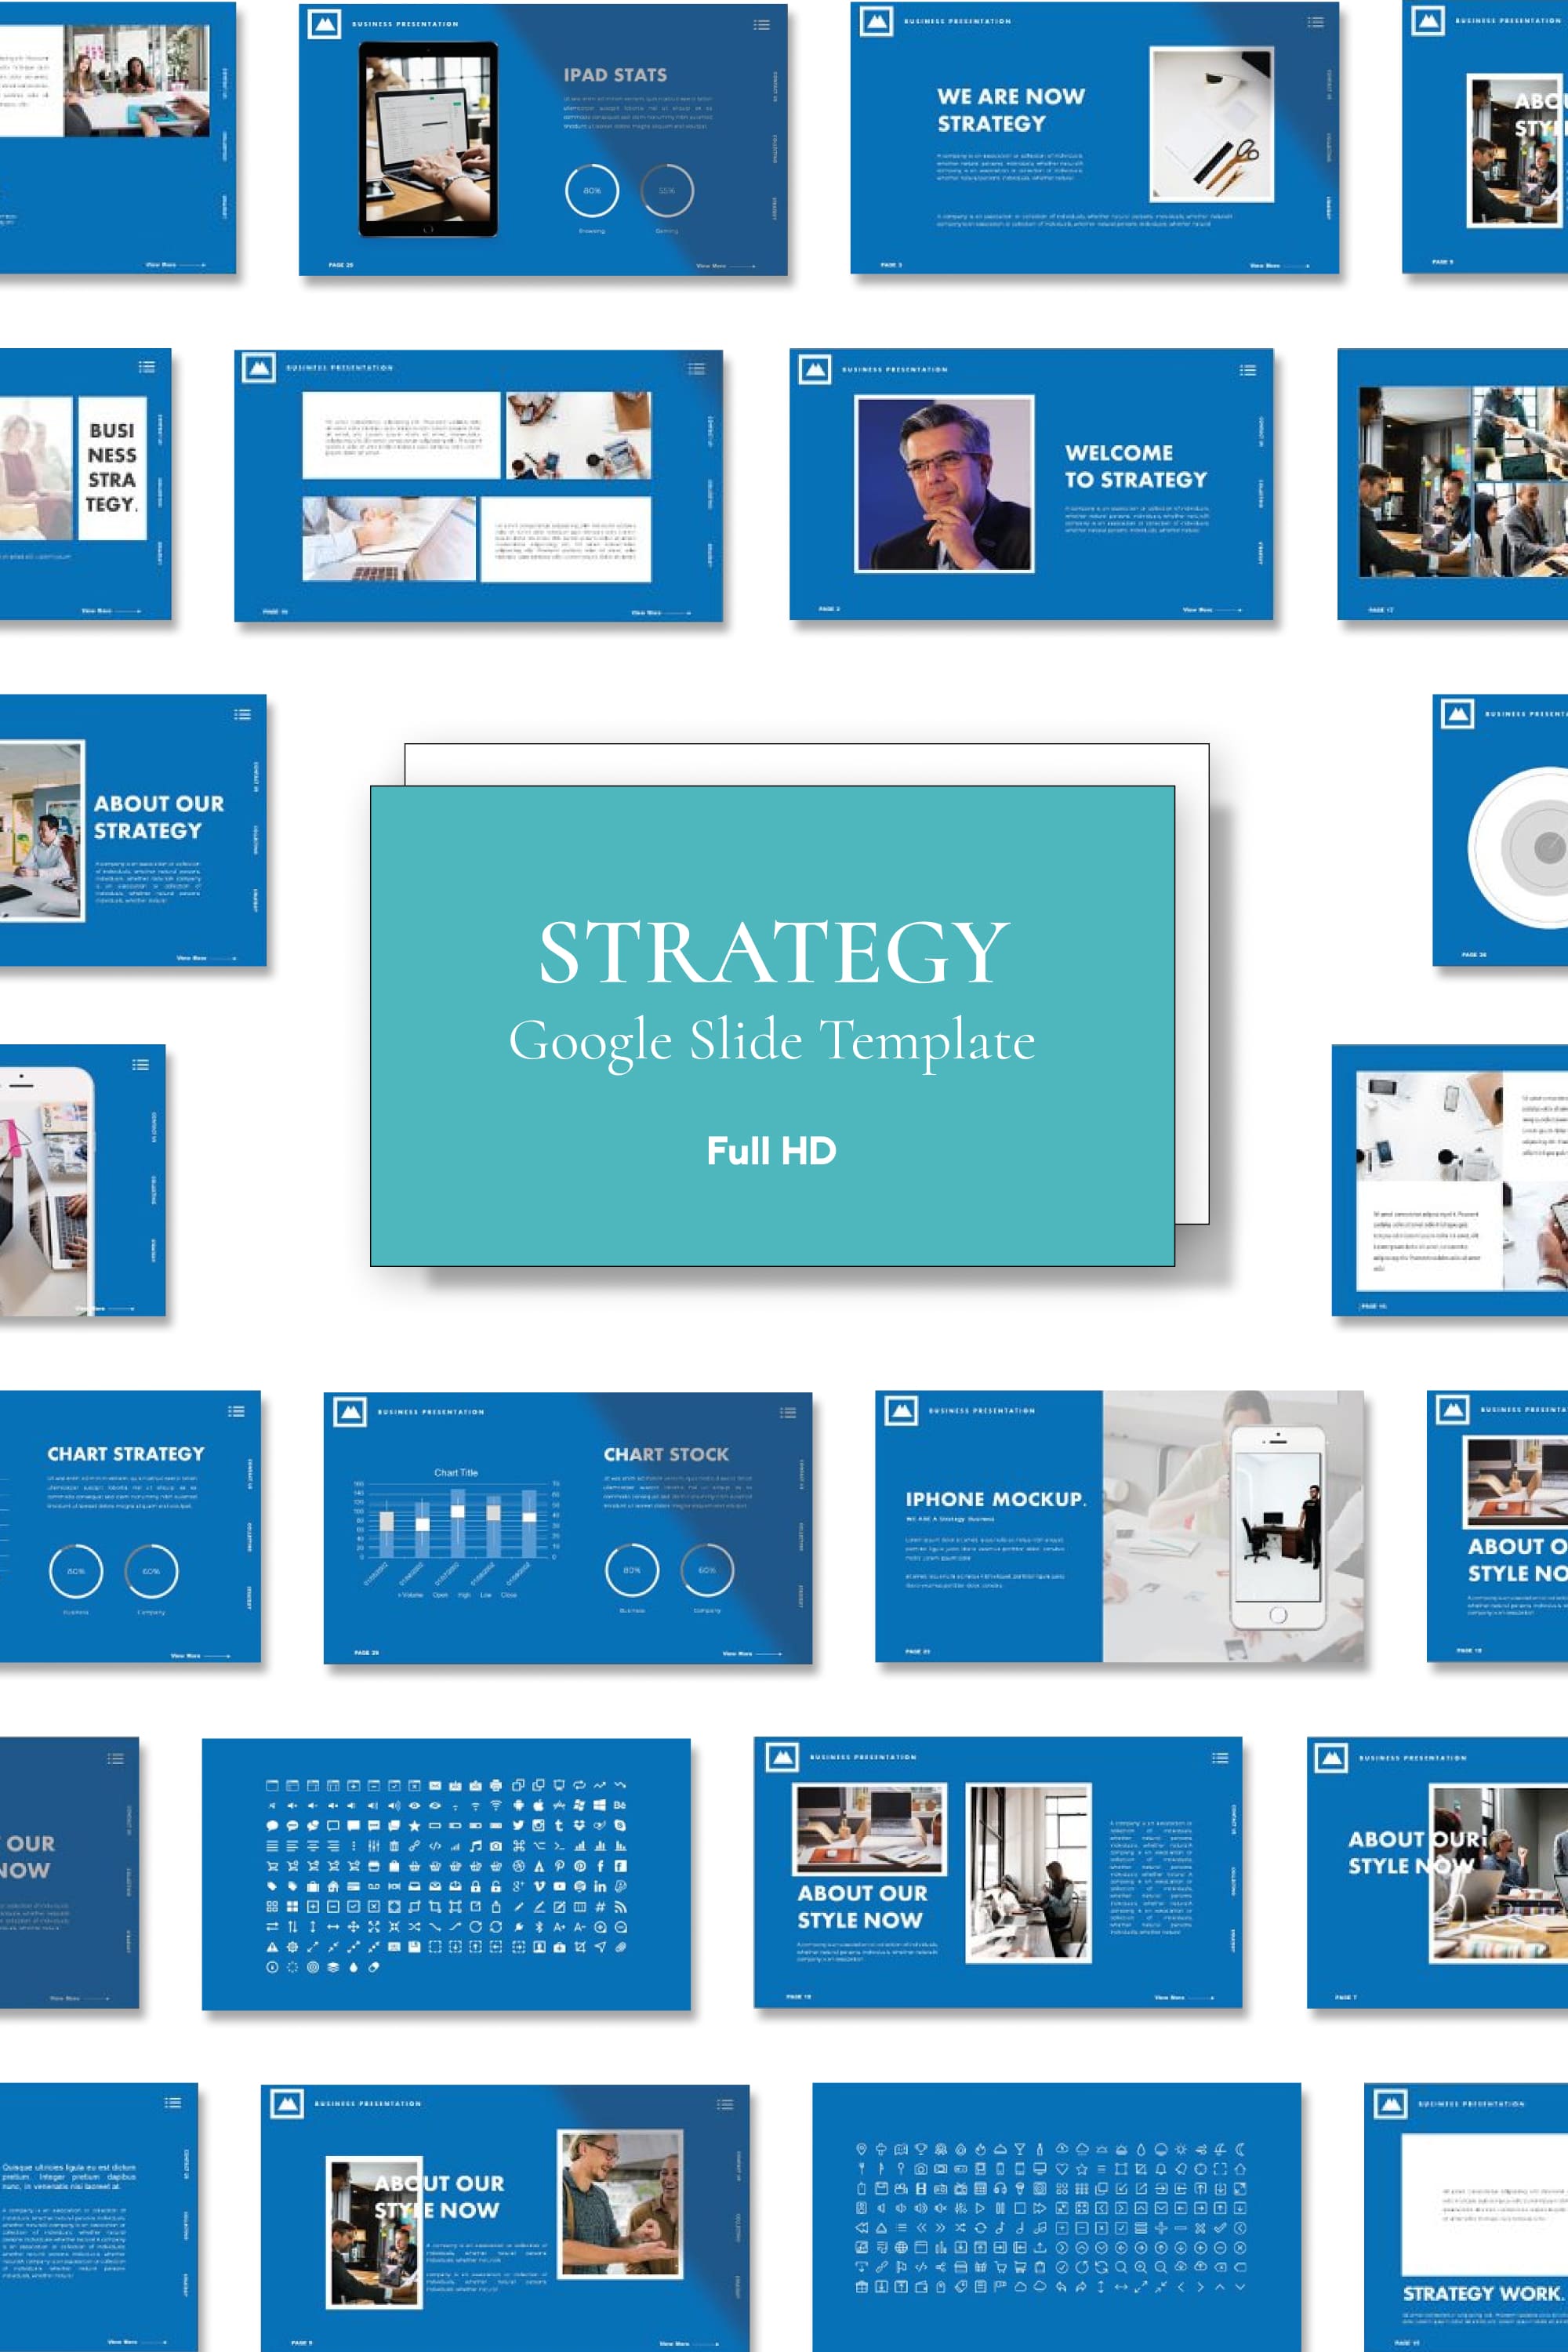 Strategy google slide template - pinterest image preview.